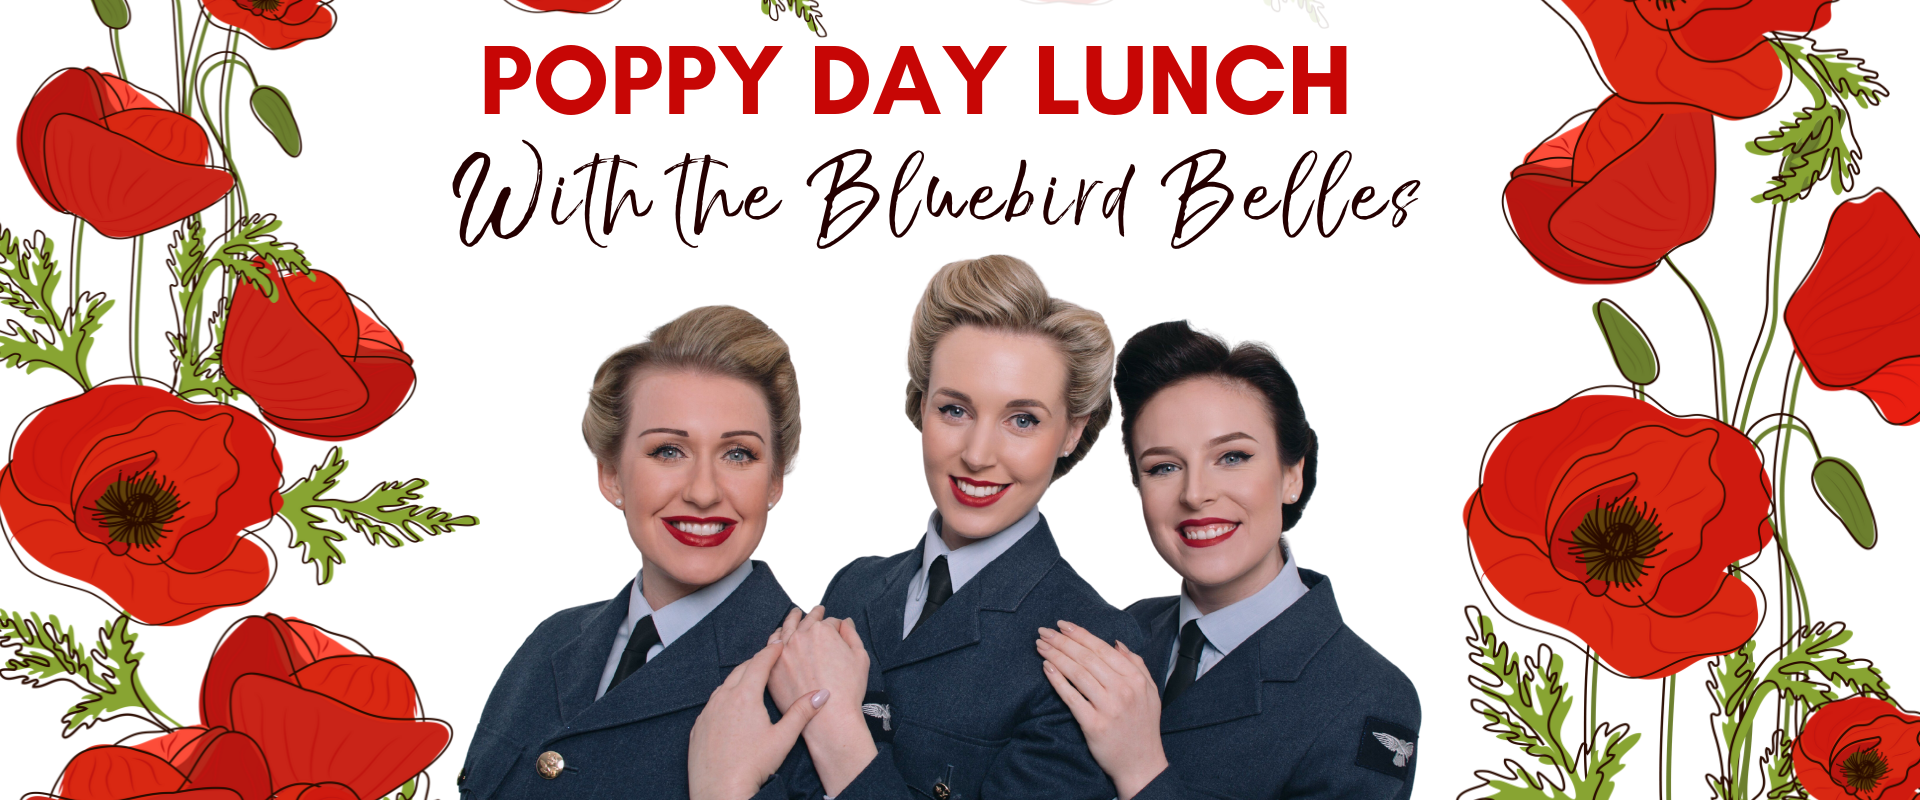 Poppy Day Lunch Poster Instagram Post Square Facebook Event Cover